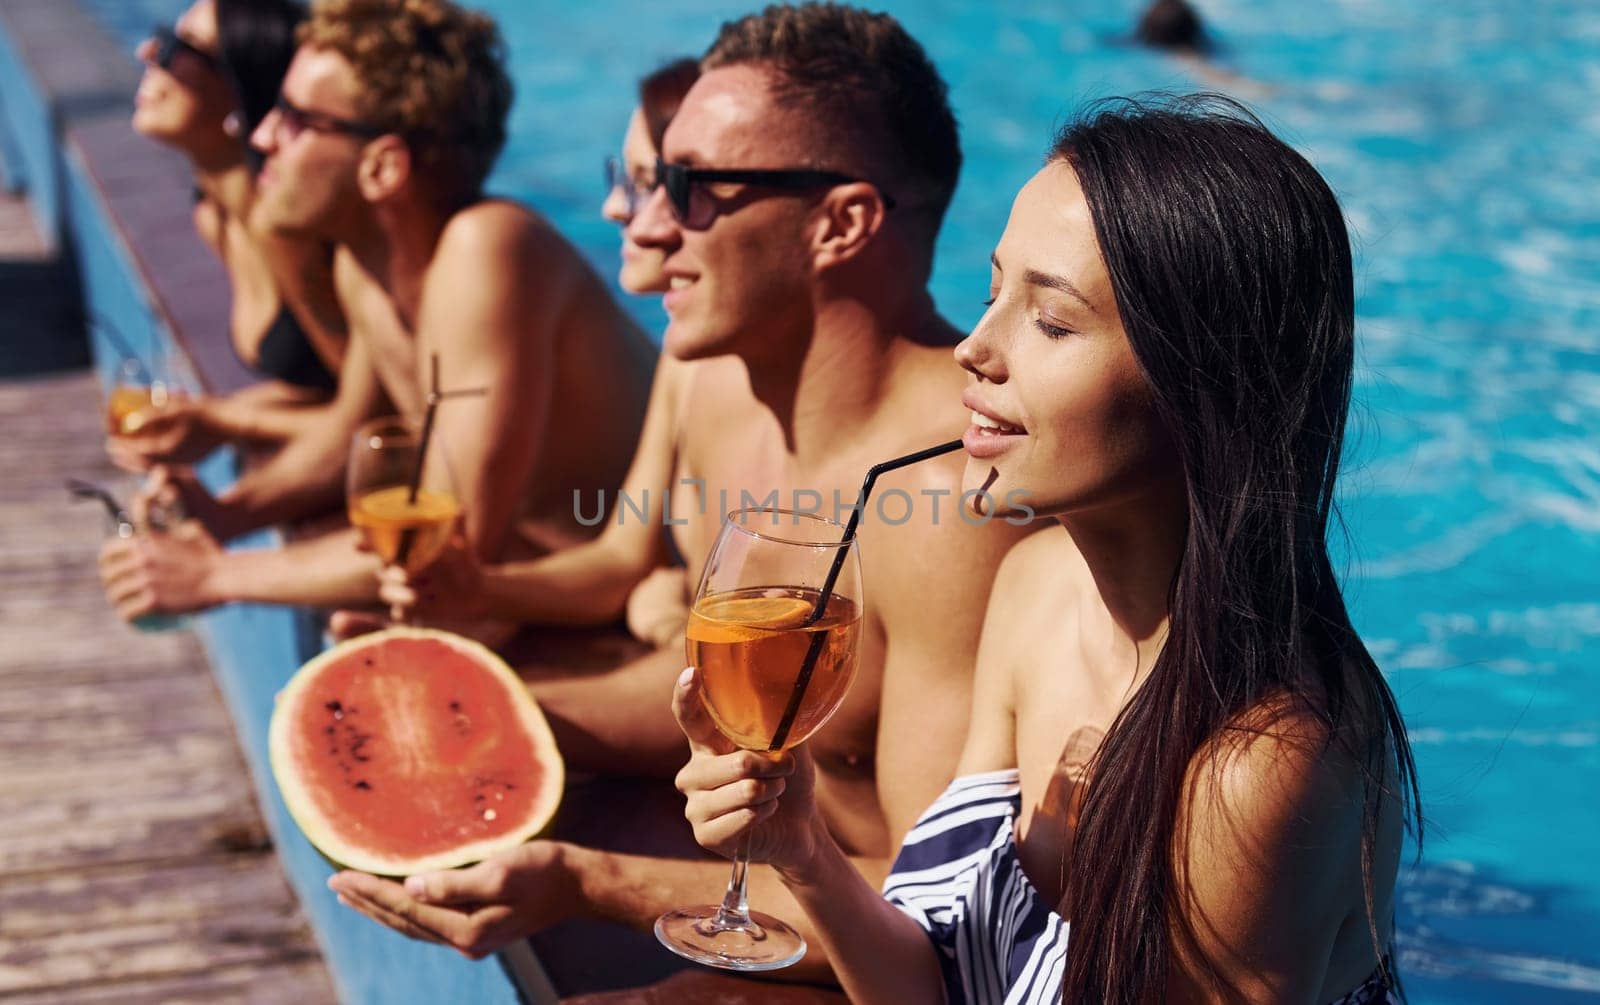 Holding watermelon. Group of young happy people have fun in swimming pool at daytime by Standret